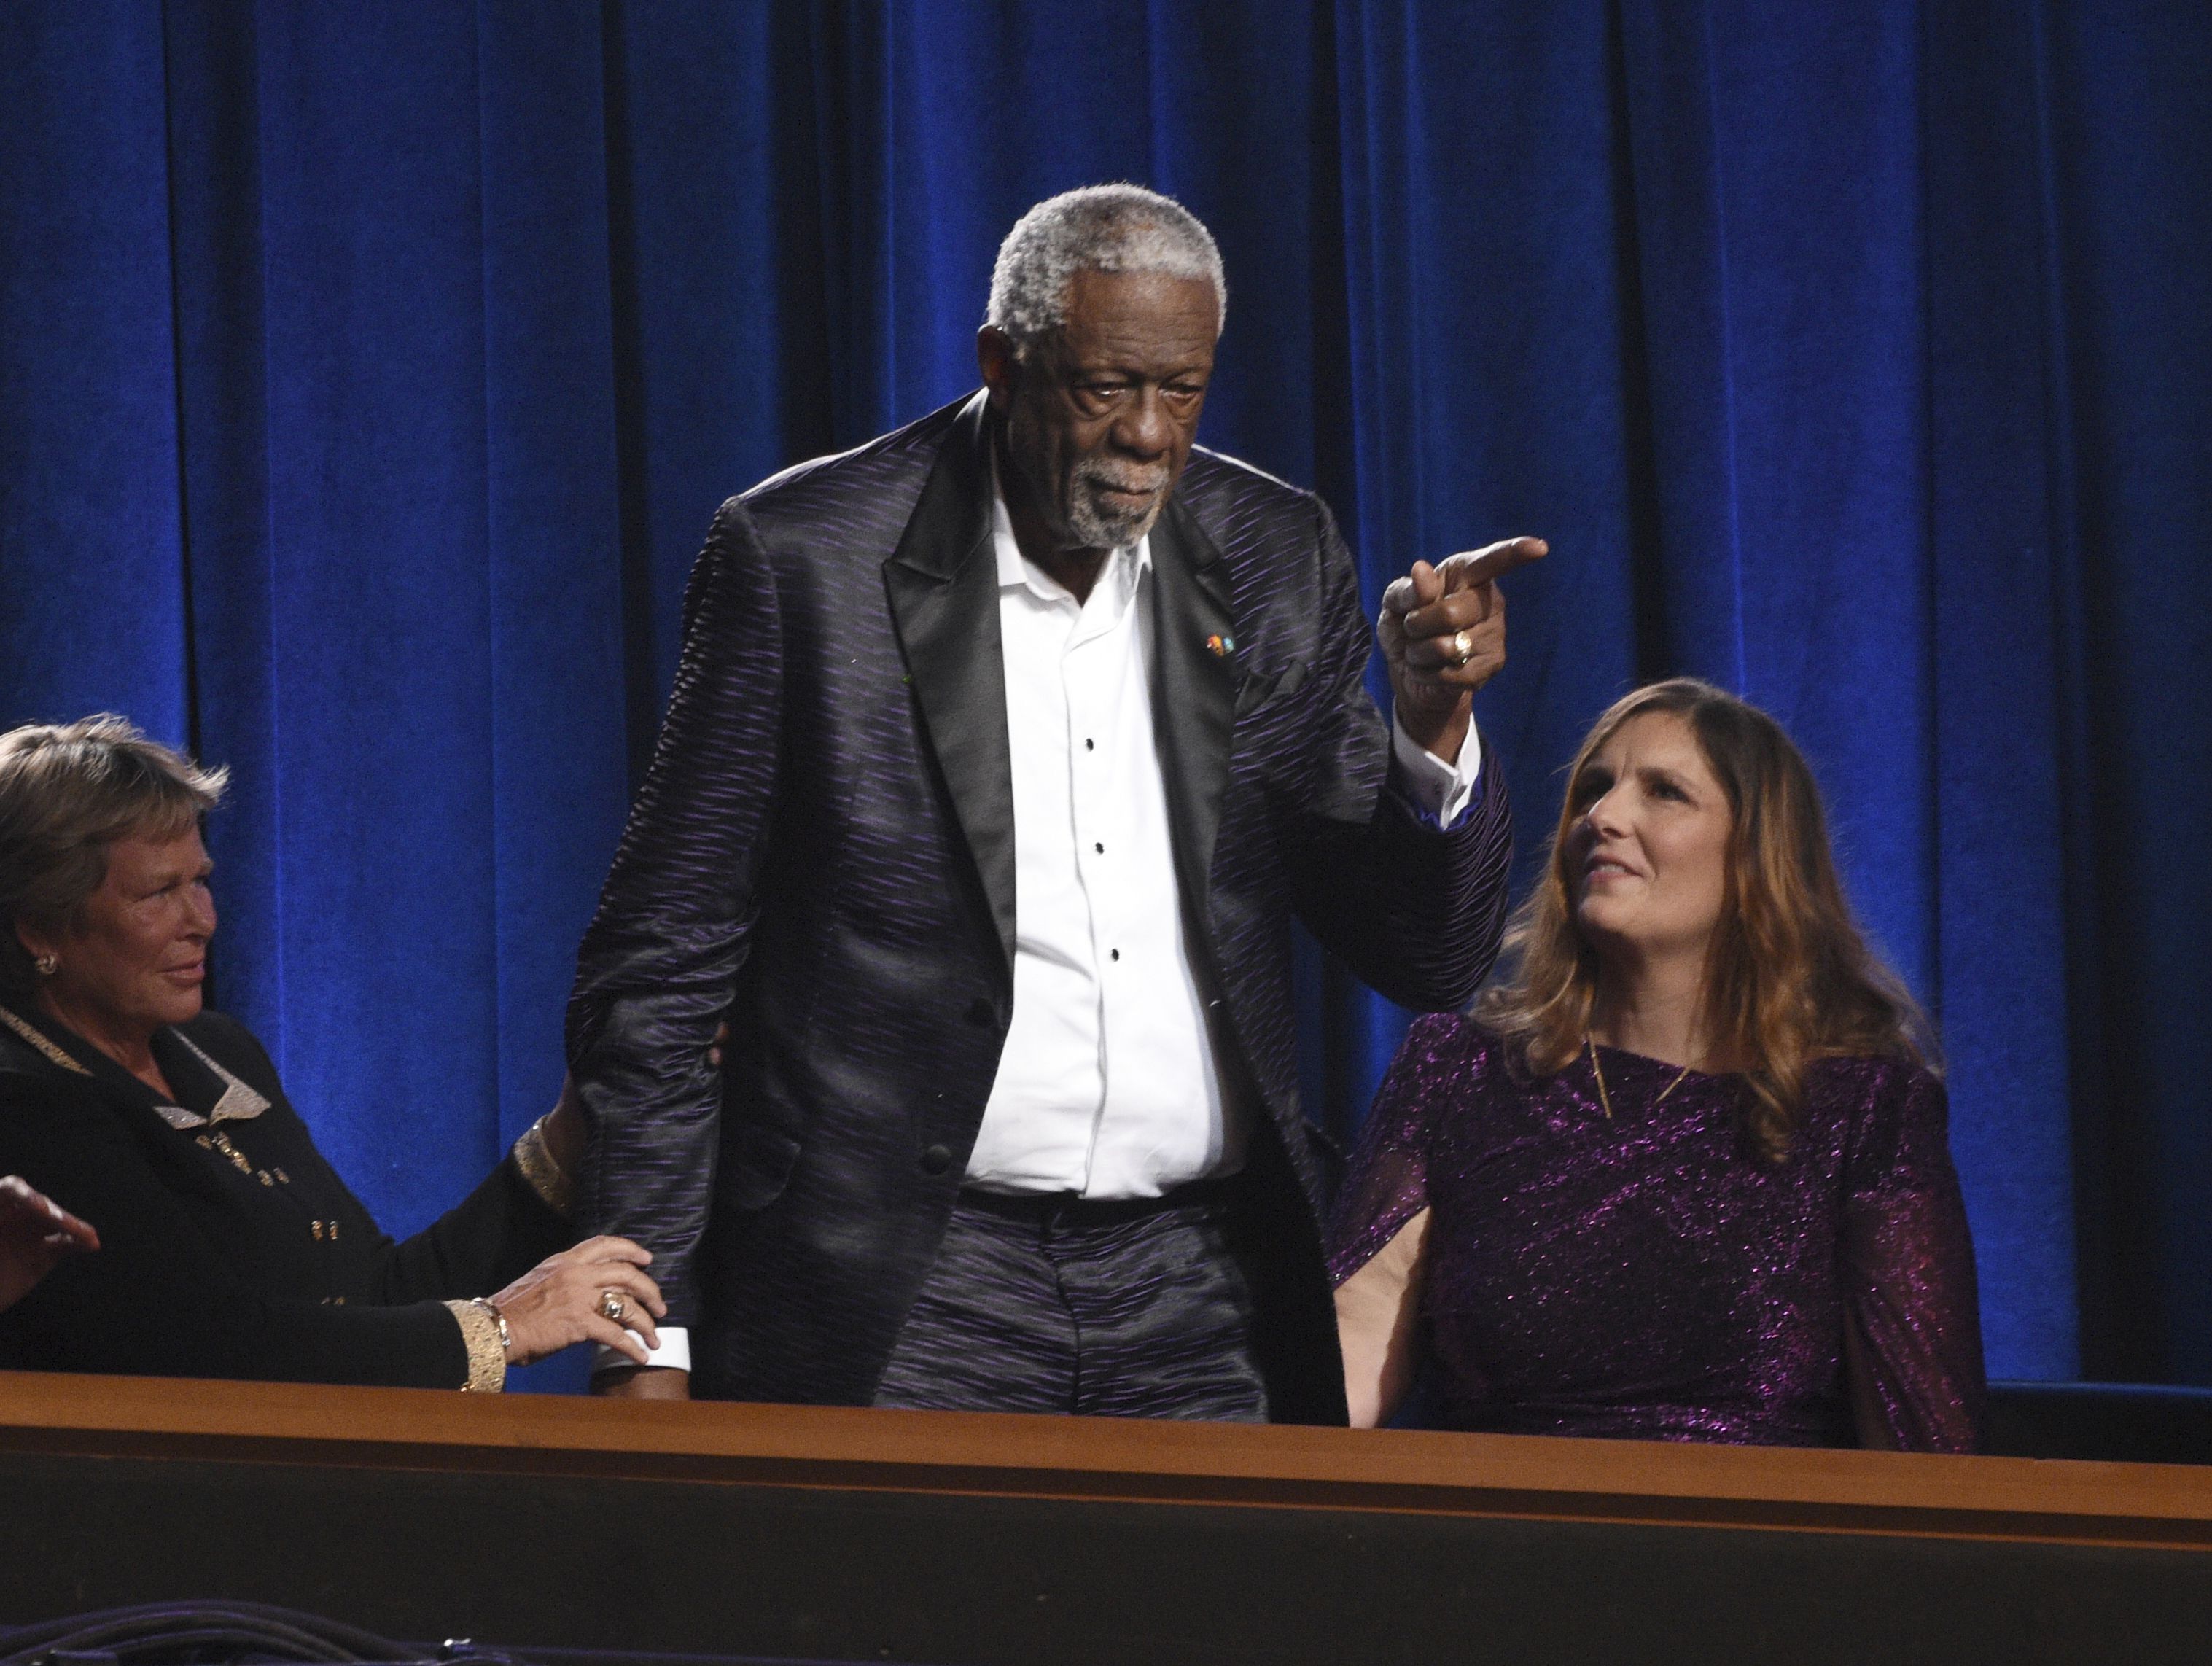 Has Bill Russell sold his NBA rings? Who bought them and for how much?